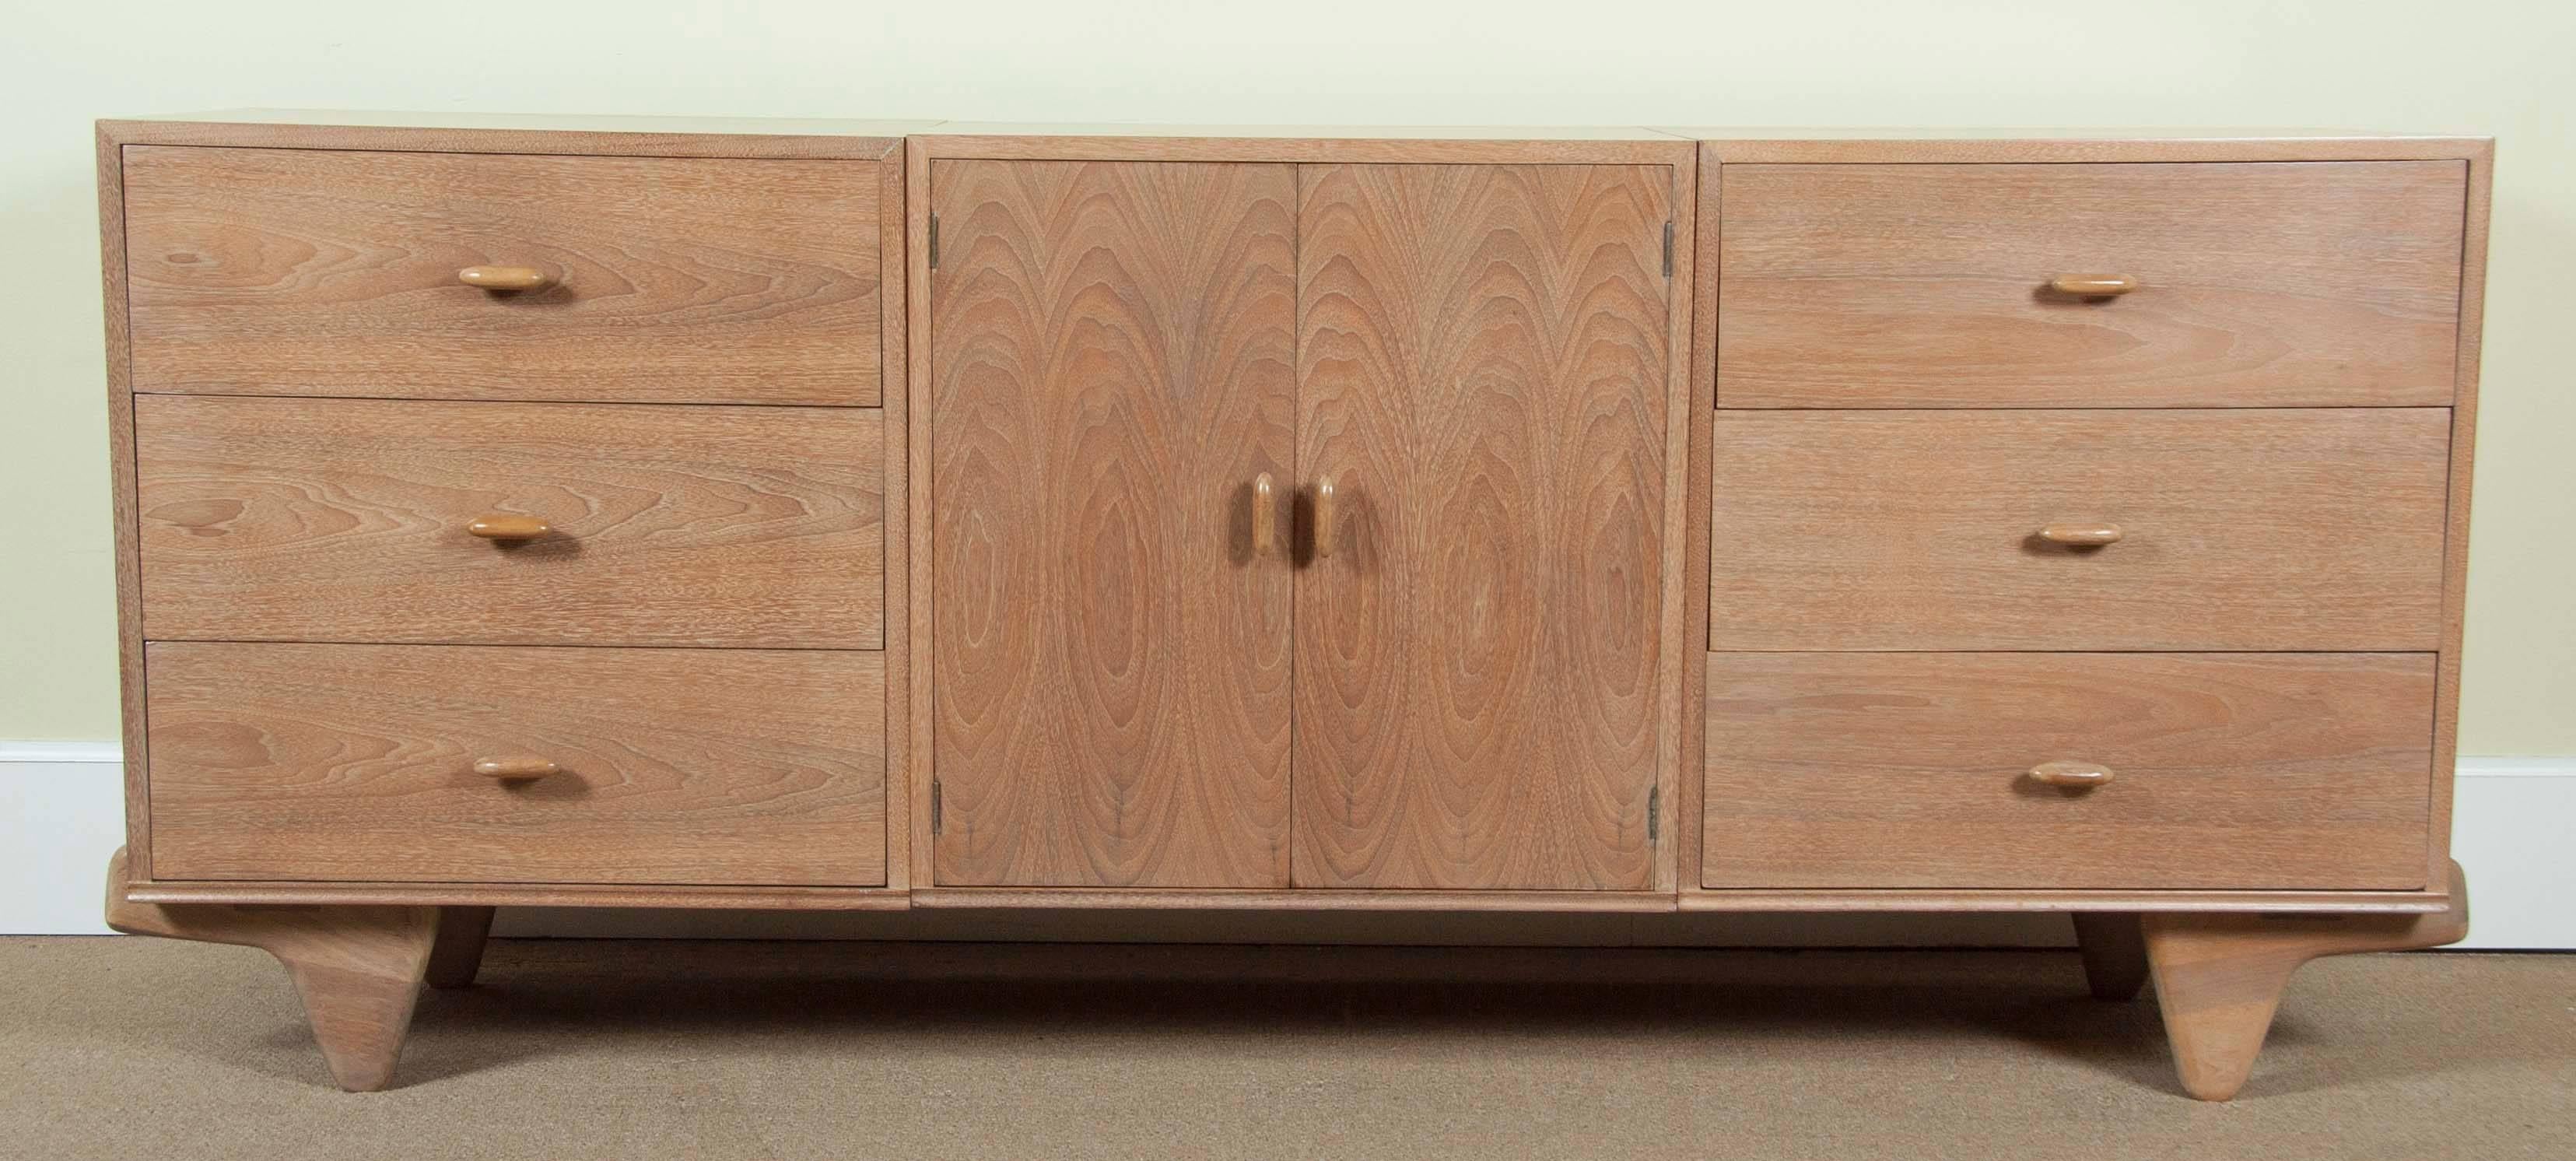 A large chest or sideboard designed by Oscar Stonorov & Willo Von Moltke for
Red Lion Furniture, 1941. This chest was designed for a MoMA exhibition of organic design and had a low production despite being produced by Red Lion. Organic design in